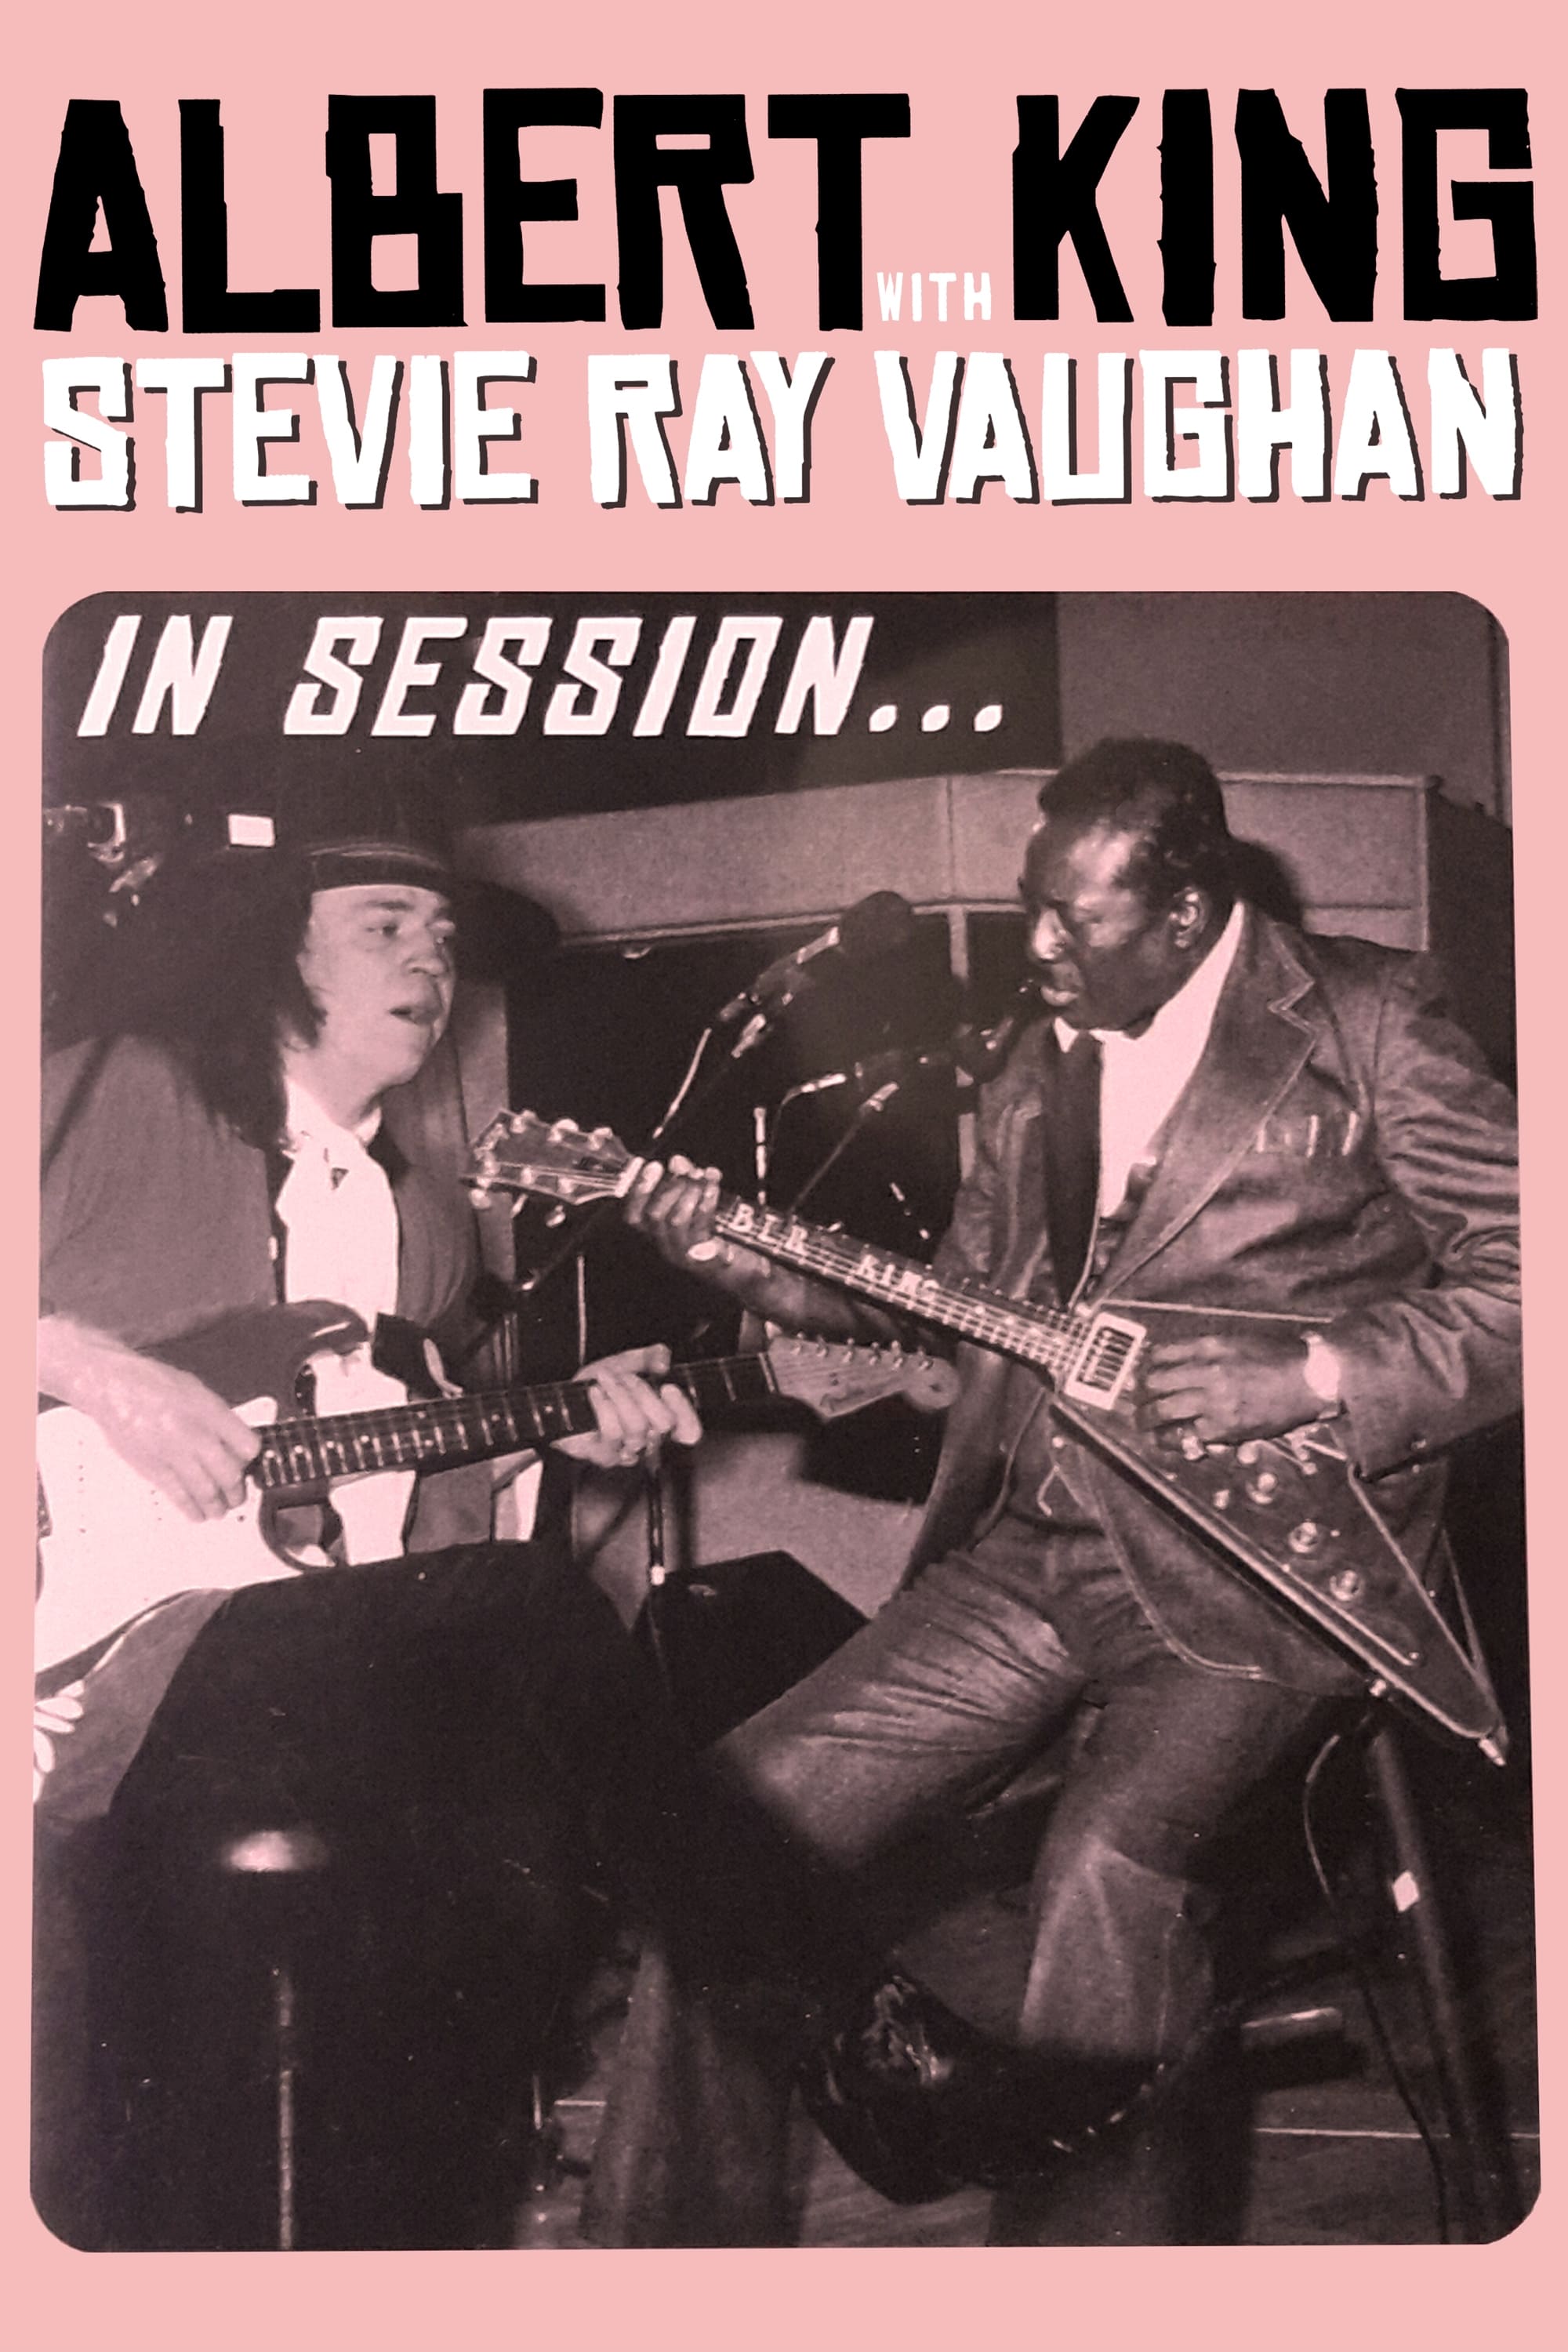 Albert King with Stevie Ray Vaughan - In Session